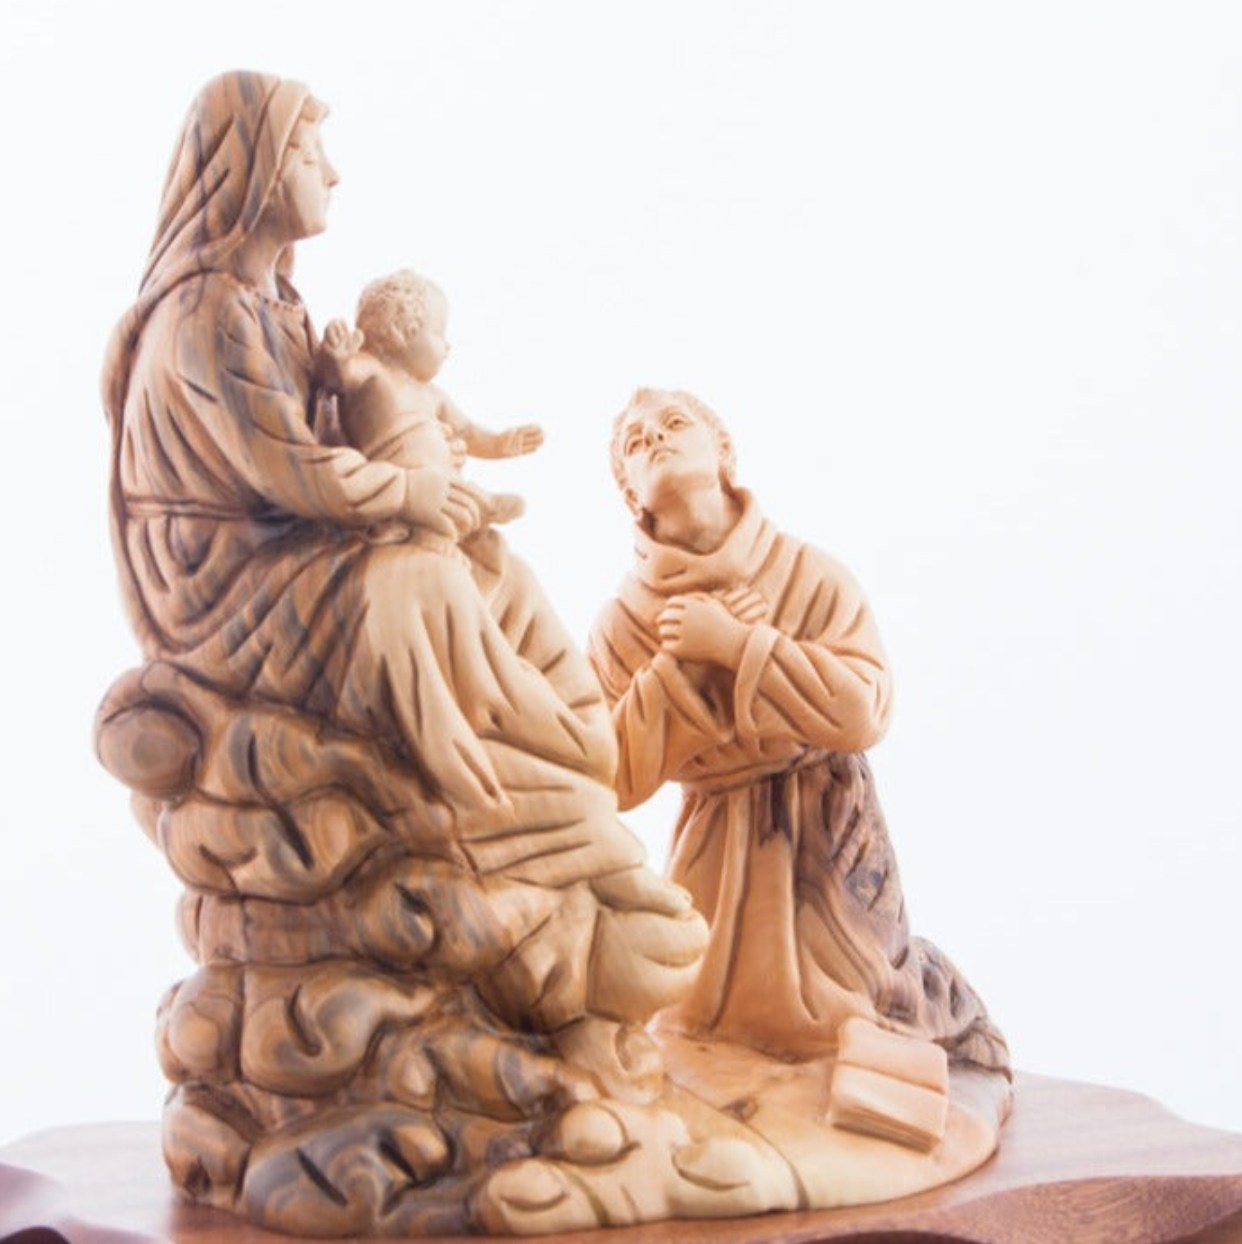 Virgin Mary Queen of the Franciscan Order with the Holy Child Jesus Christ with Kneeling St Francis Carving from Olive Wood grown in the Holy Land, beautiful unique christian art  hand made in Bethlehem